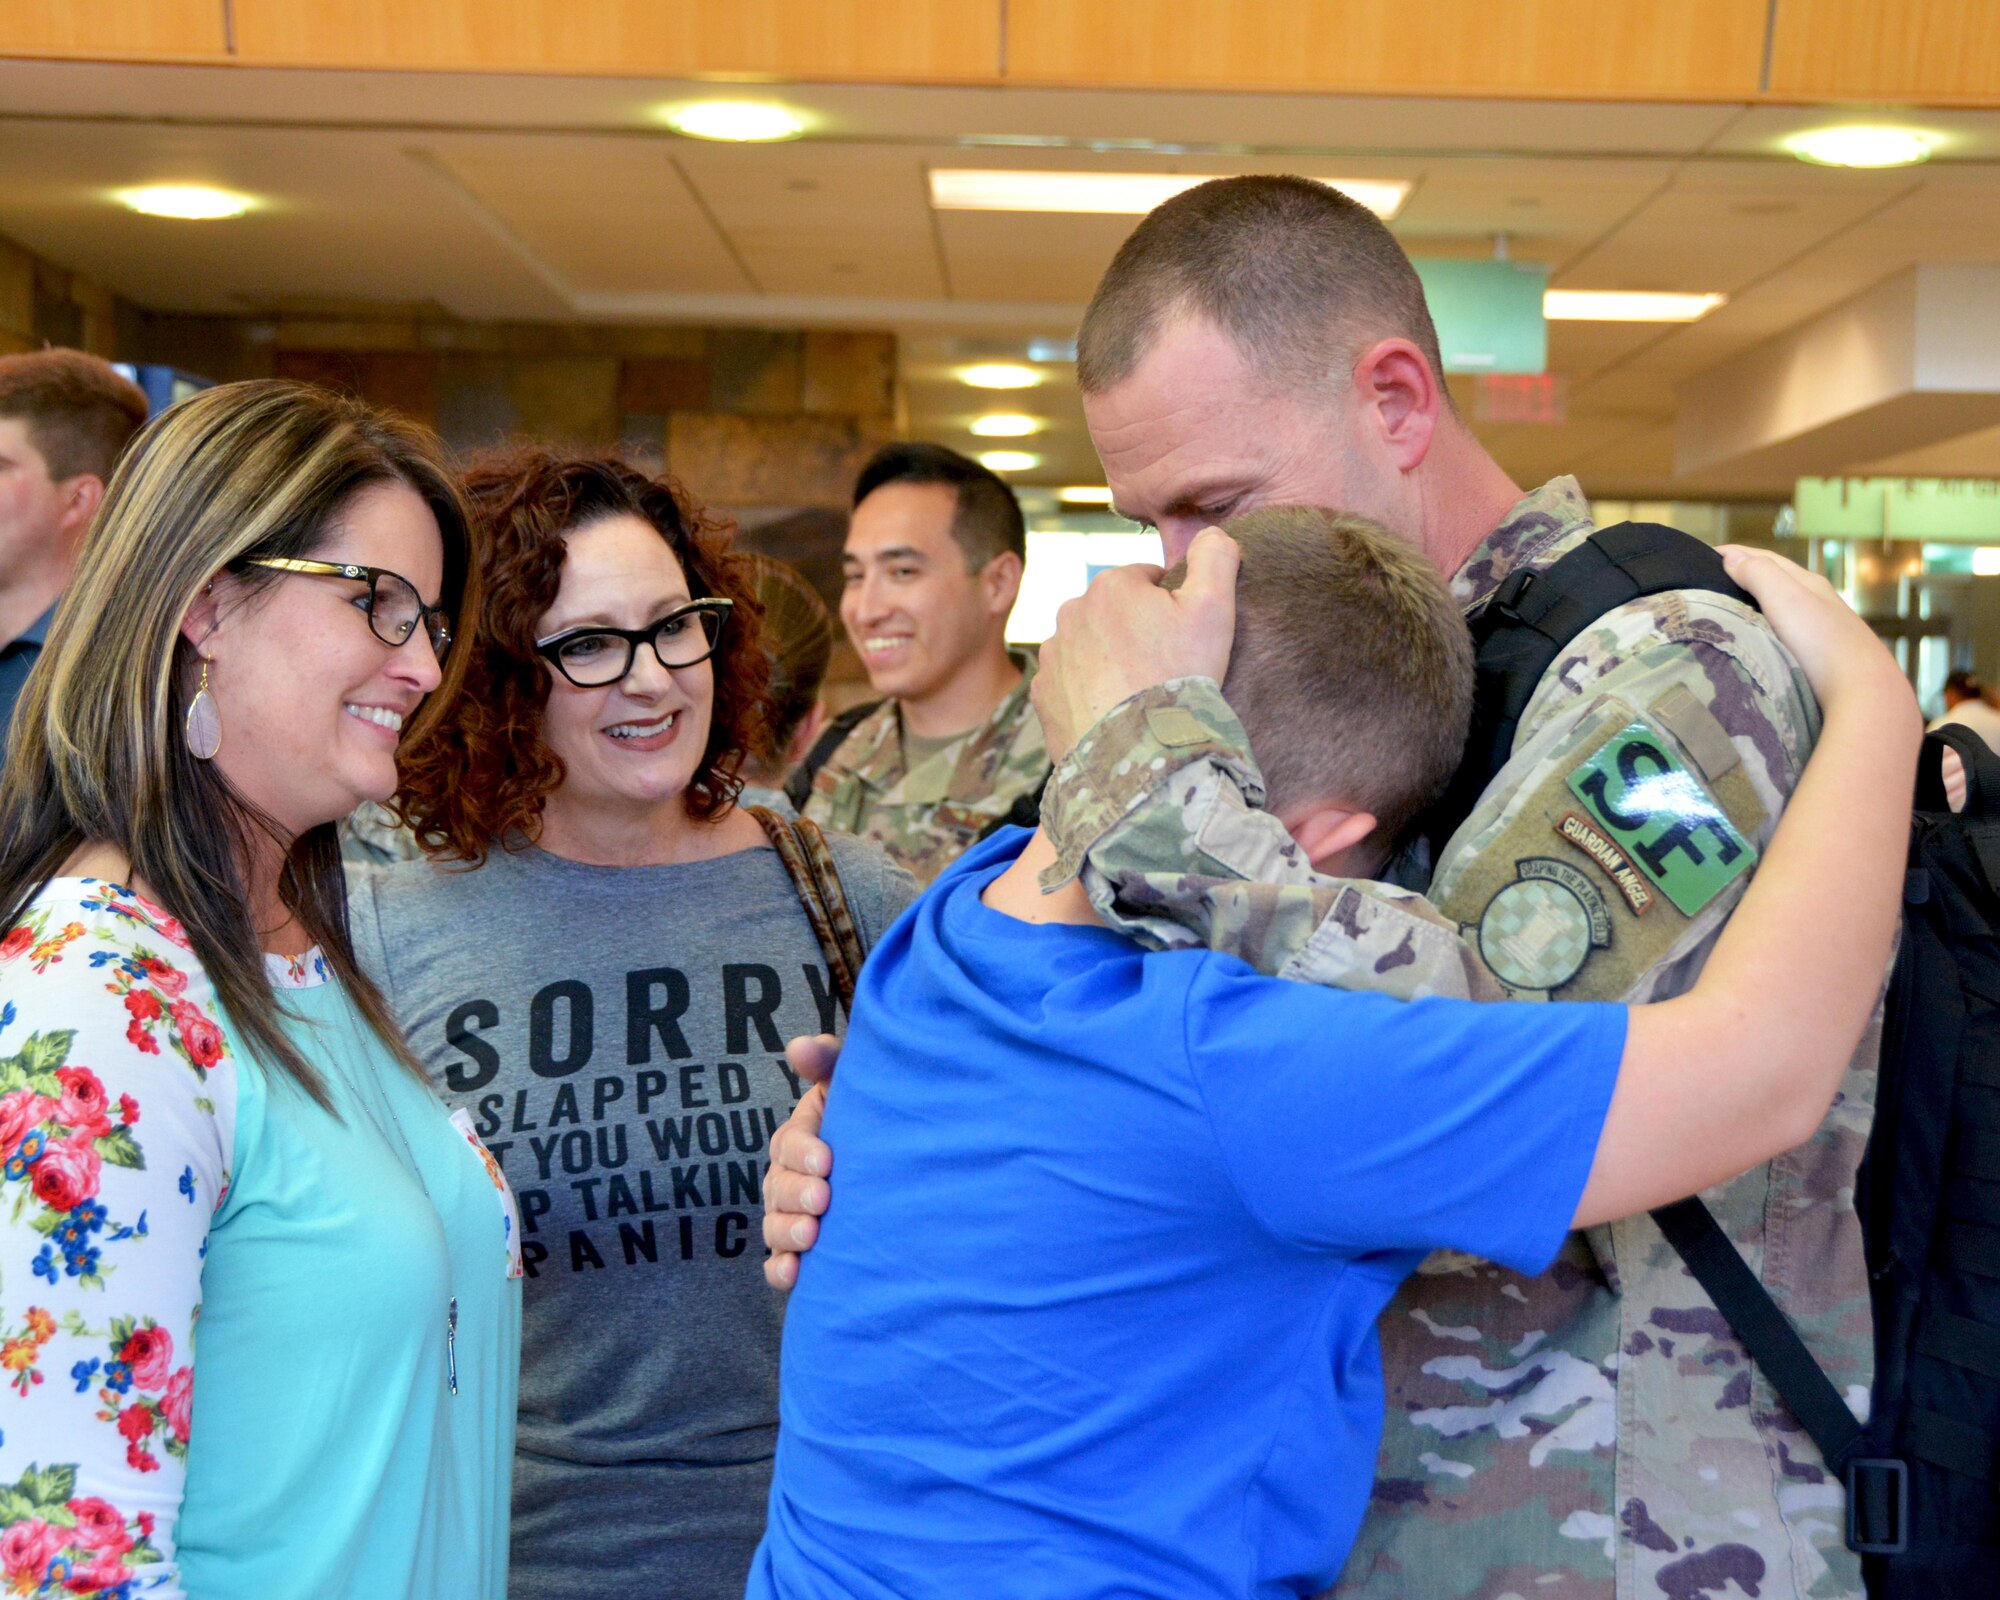 Reserve defenders from the 507th Air Refueling Wing Security Forces Squadron reunite with friends and family Oct. 1, 2017, at Will Rogers World Airport in Oklahoma City, following a six-month deployment to Afghanistan in support of Operation Freedom’s Sentinel. The Reserve Citizen Airmen served at Kandahar Air Base, Afghanistan, where they assisted the Afghan Air Force in their fight against insurgents. The team of Reserve defenders was part of a Fly Away Security Team, which is made up of Security Forces Airmen who travel with aircraft to provide extra security around unsecured foreign airfields. (U.S. Air Force photo/Tech. Sgt. Samantha Mathison)